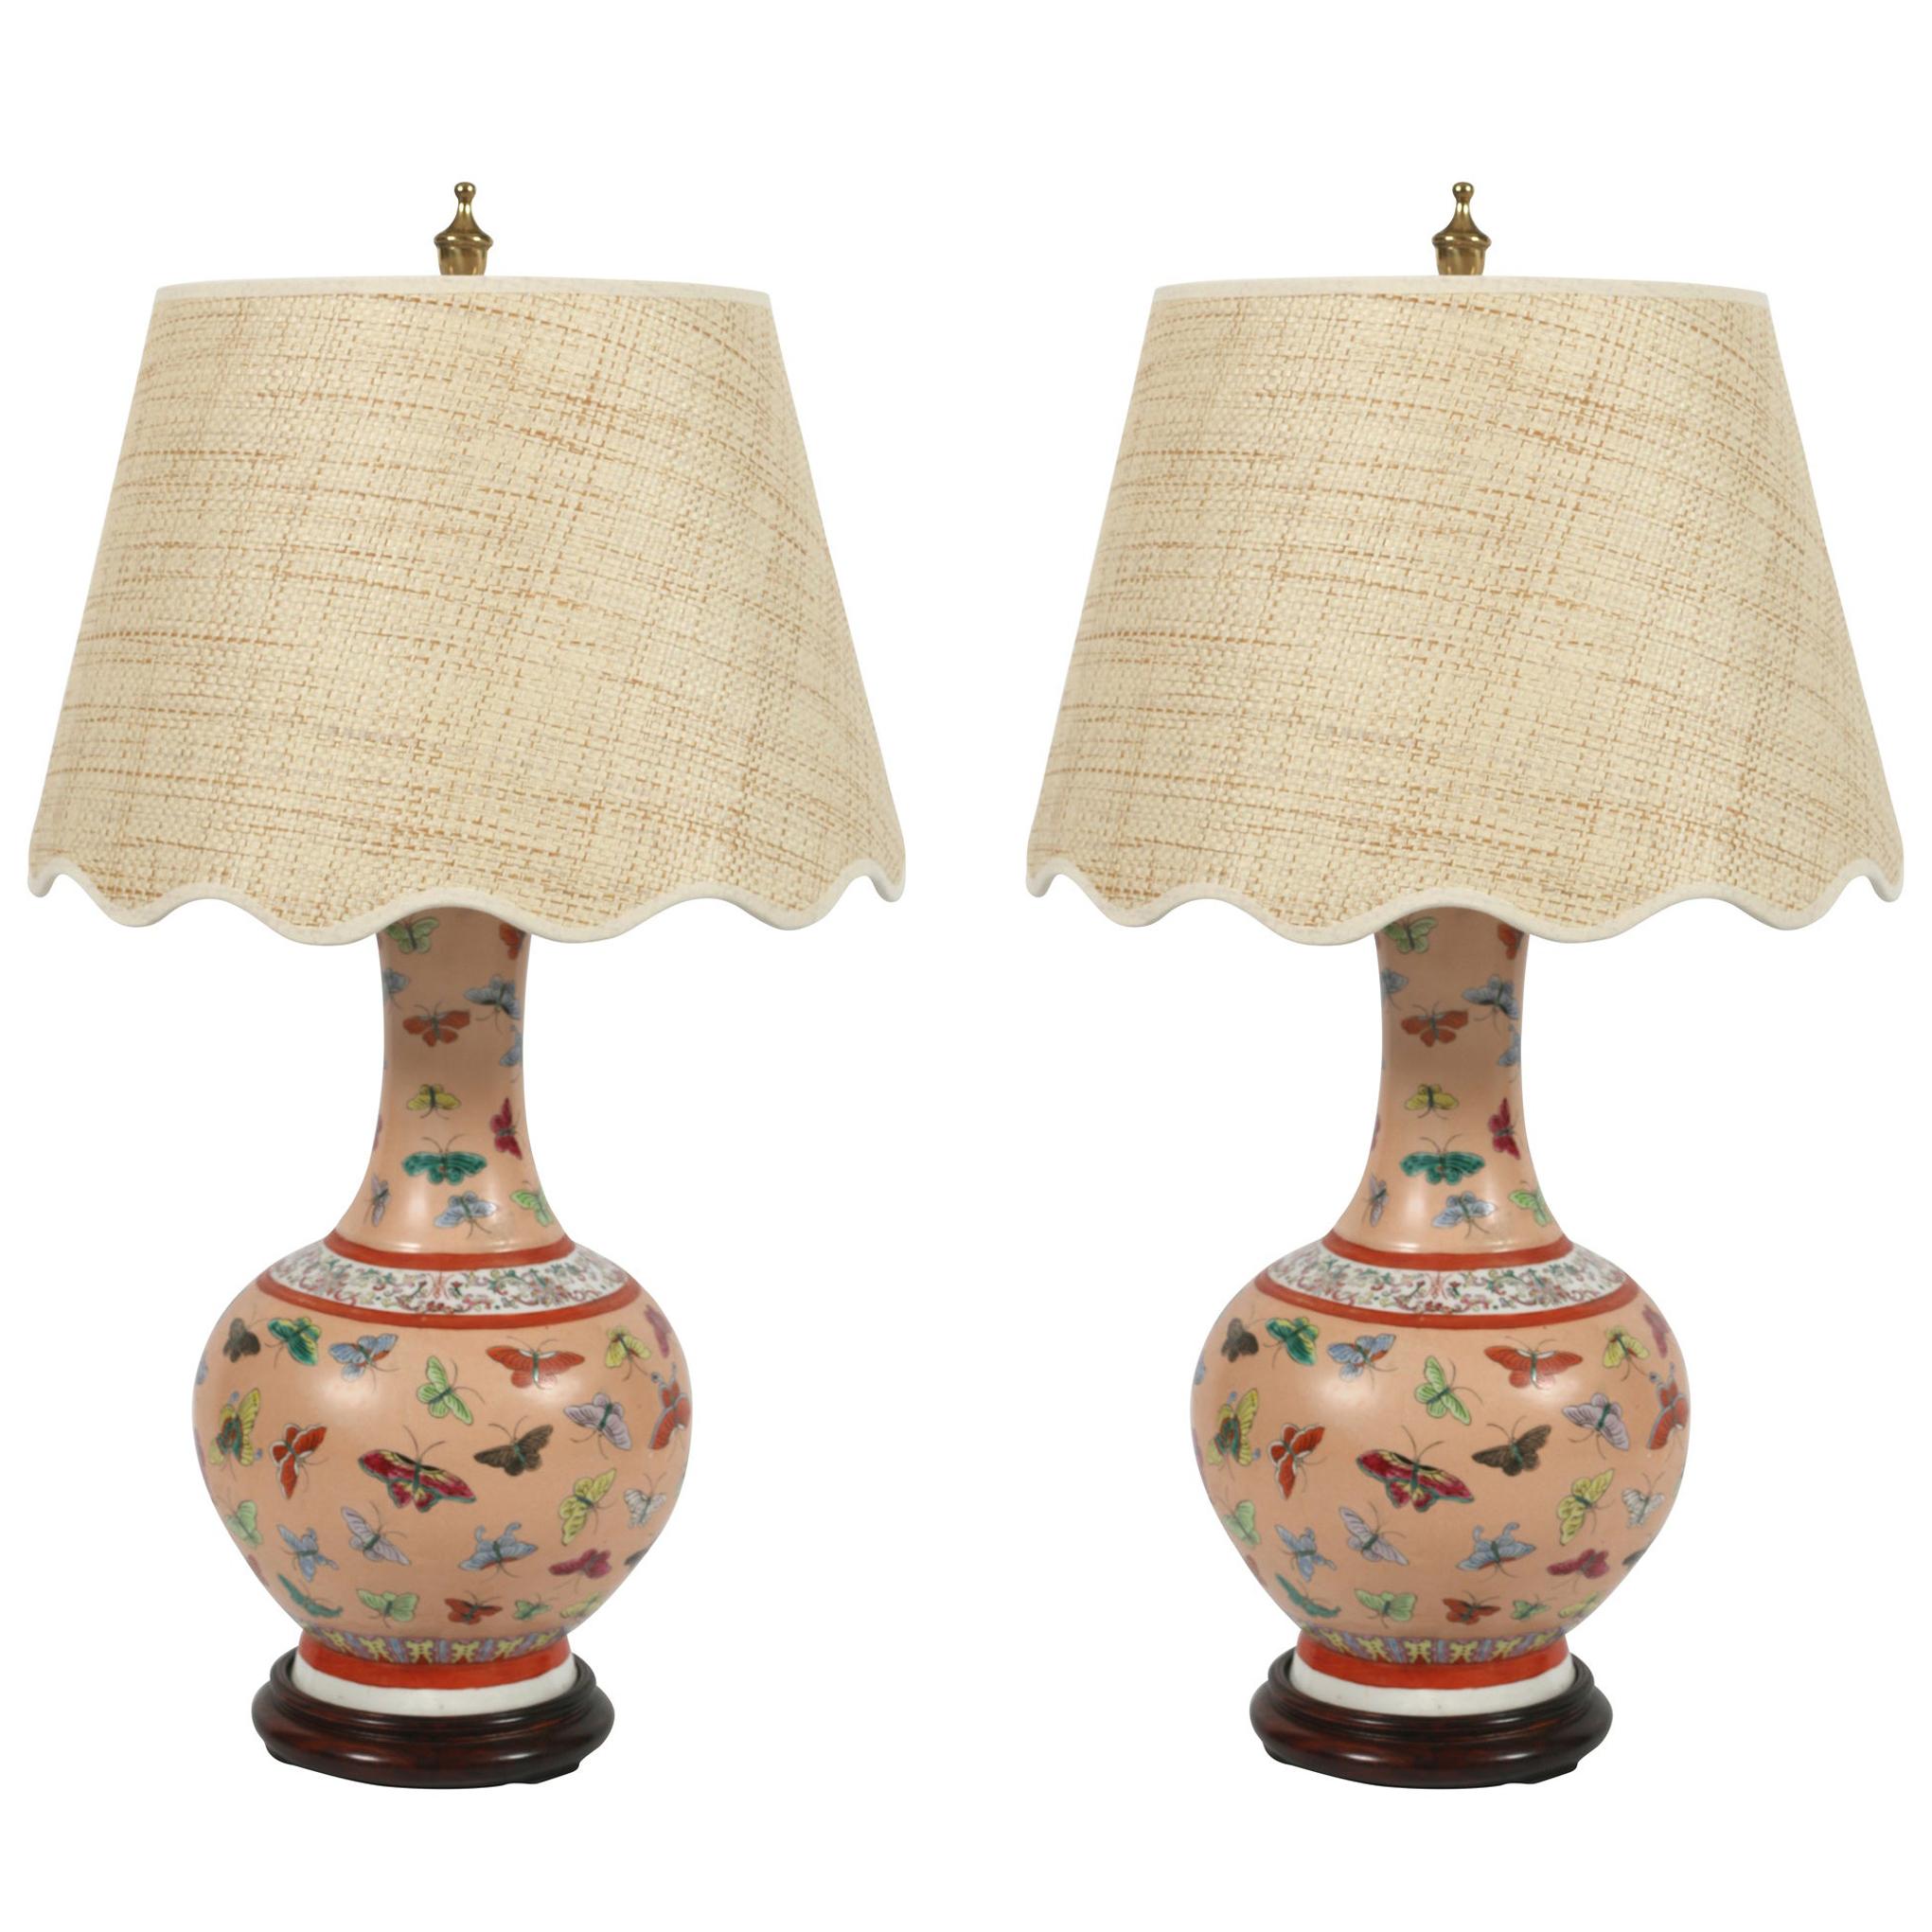 Pair of Chinese Porcelain Lamps with Butterflies